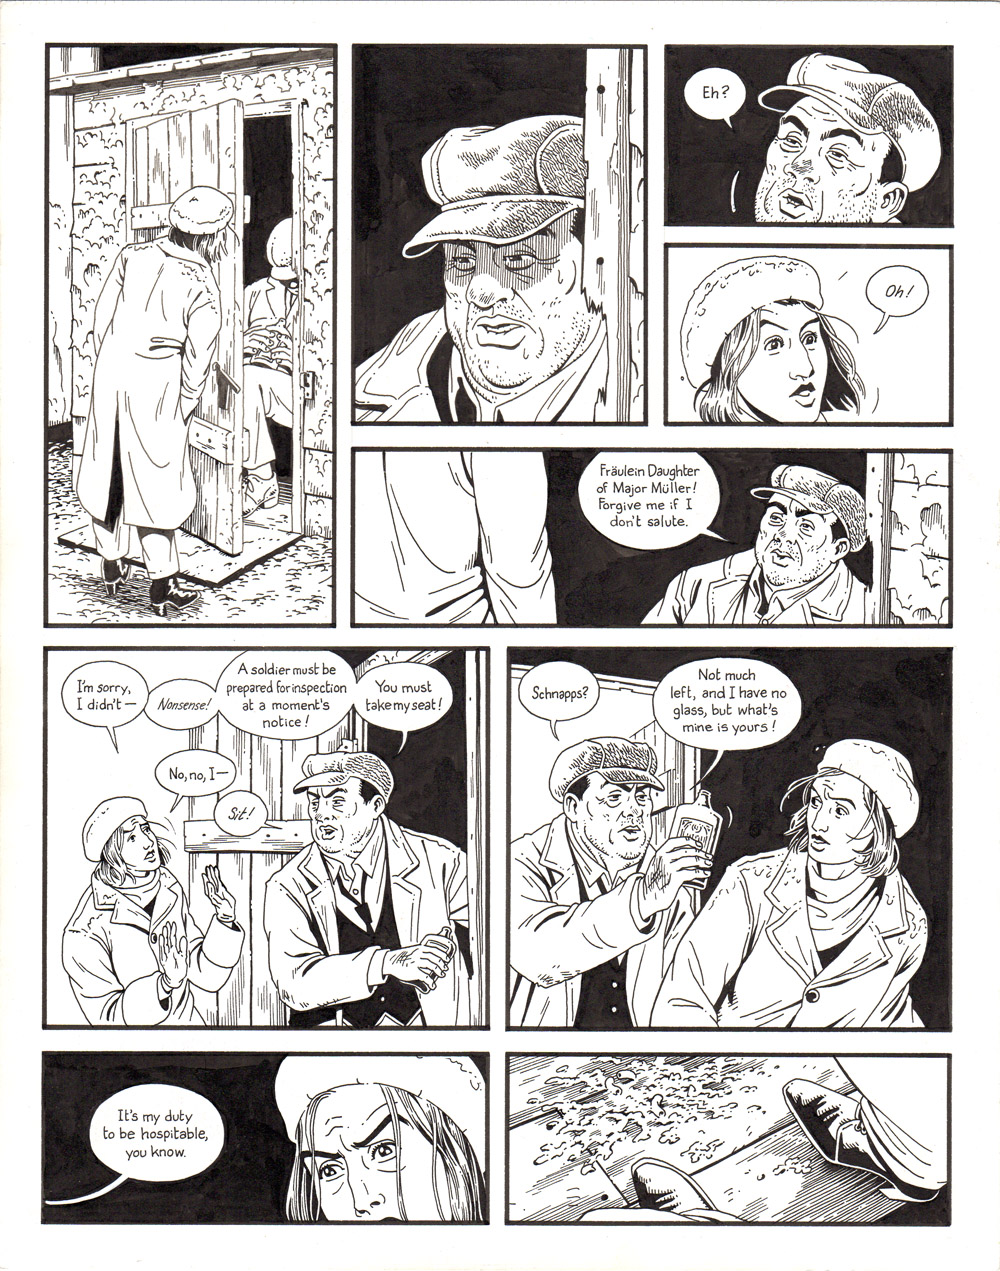 Berlin - page 108 Book One: City of Stones - page 112